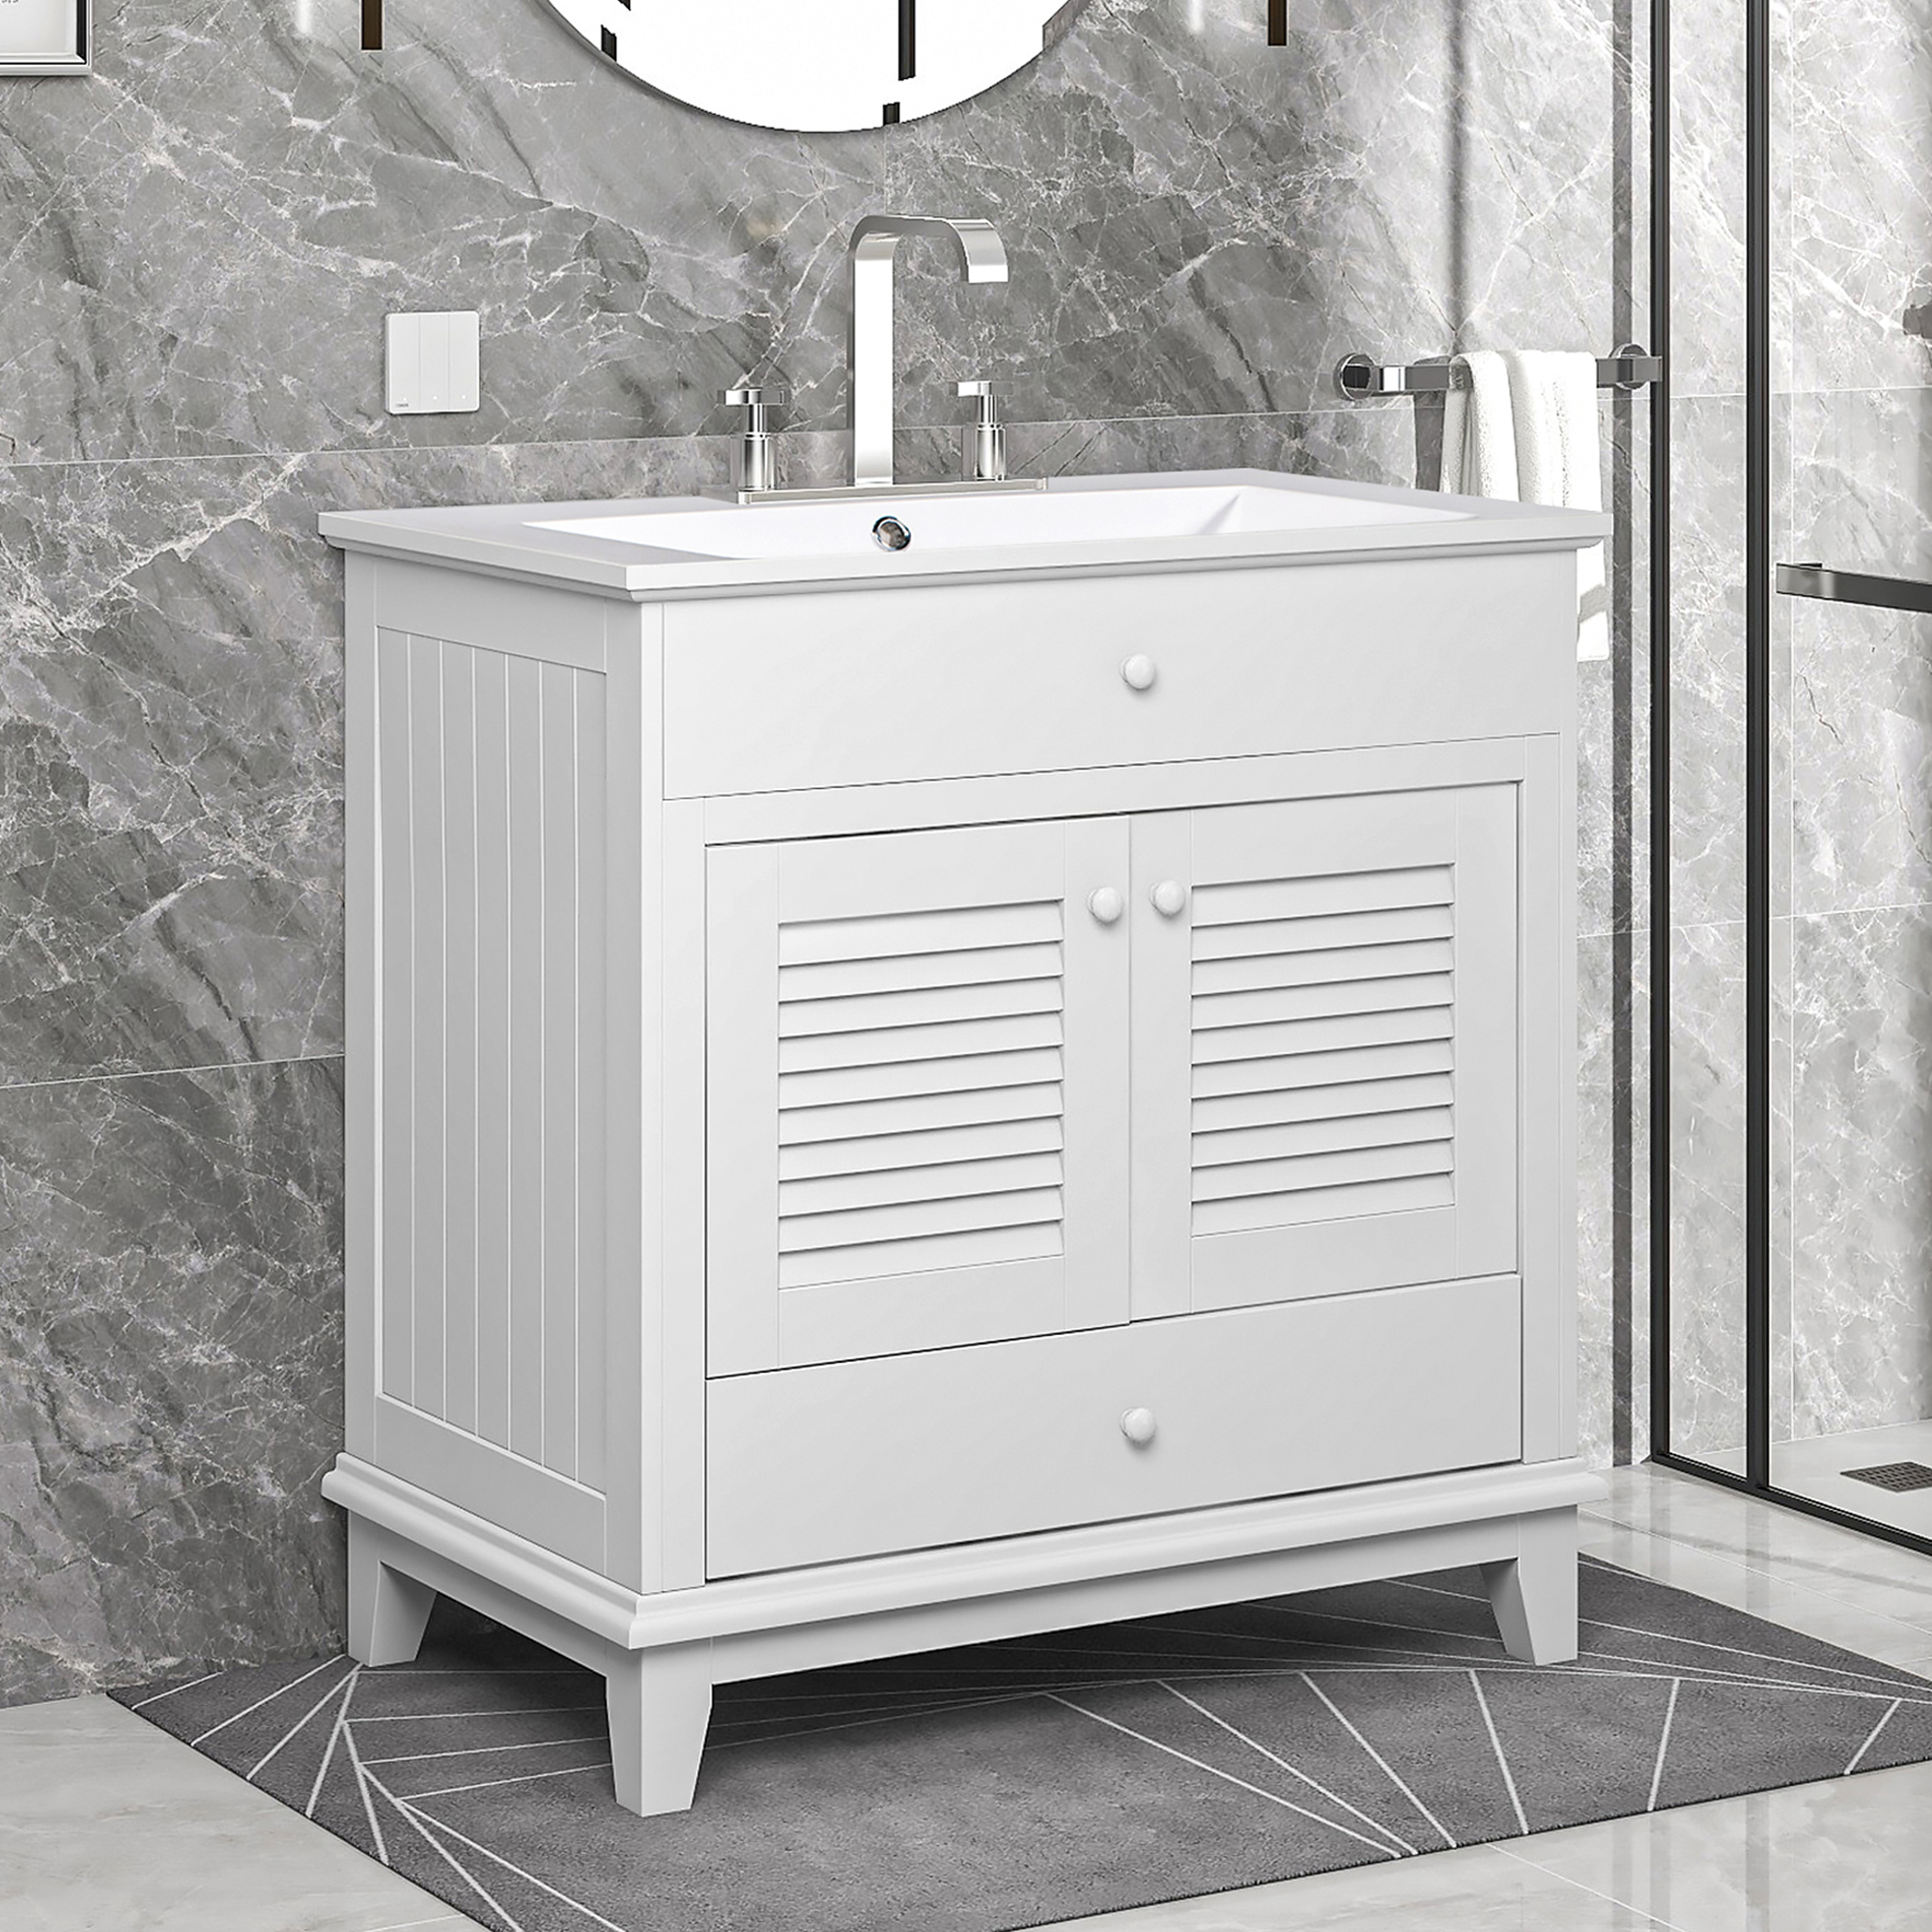 Bathroom Cabinet with Two Doors and One Drawer - JL000005AAK